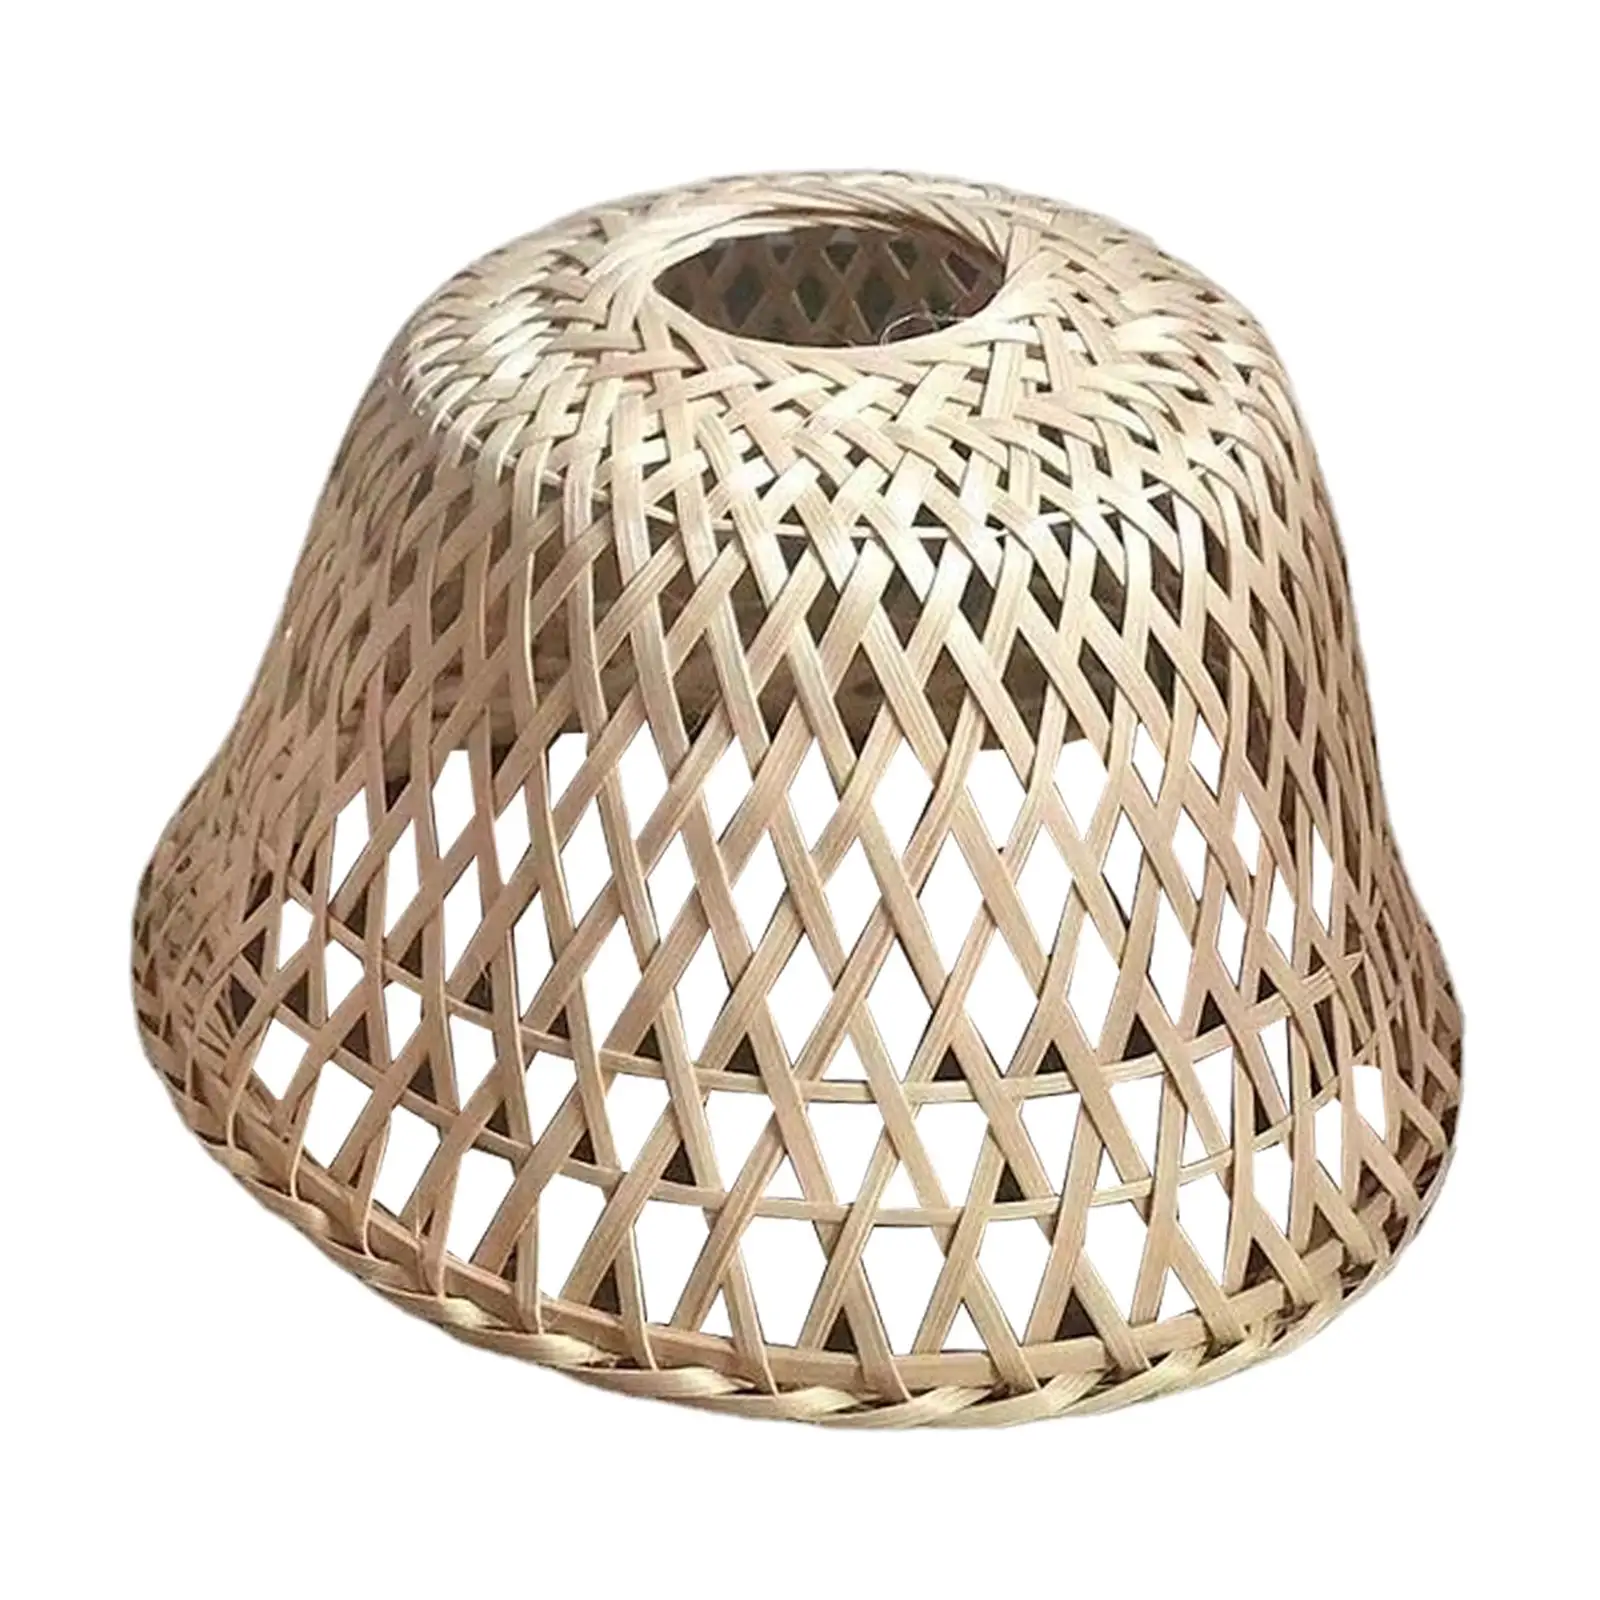 Retro Style Bamboo Weave Hanging Lamp Shade for Kitchen Bedroom Replacement Durable Farmhouse Decor Chandelier Cover Dust Proof